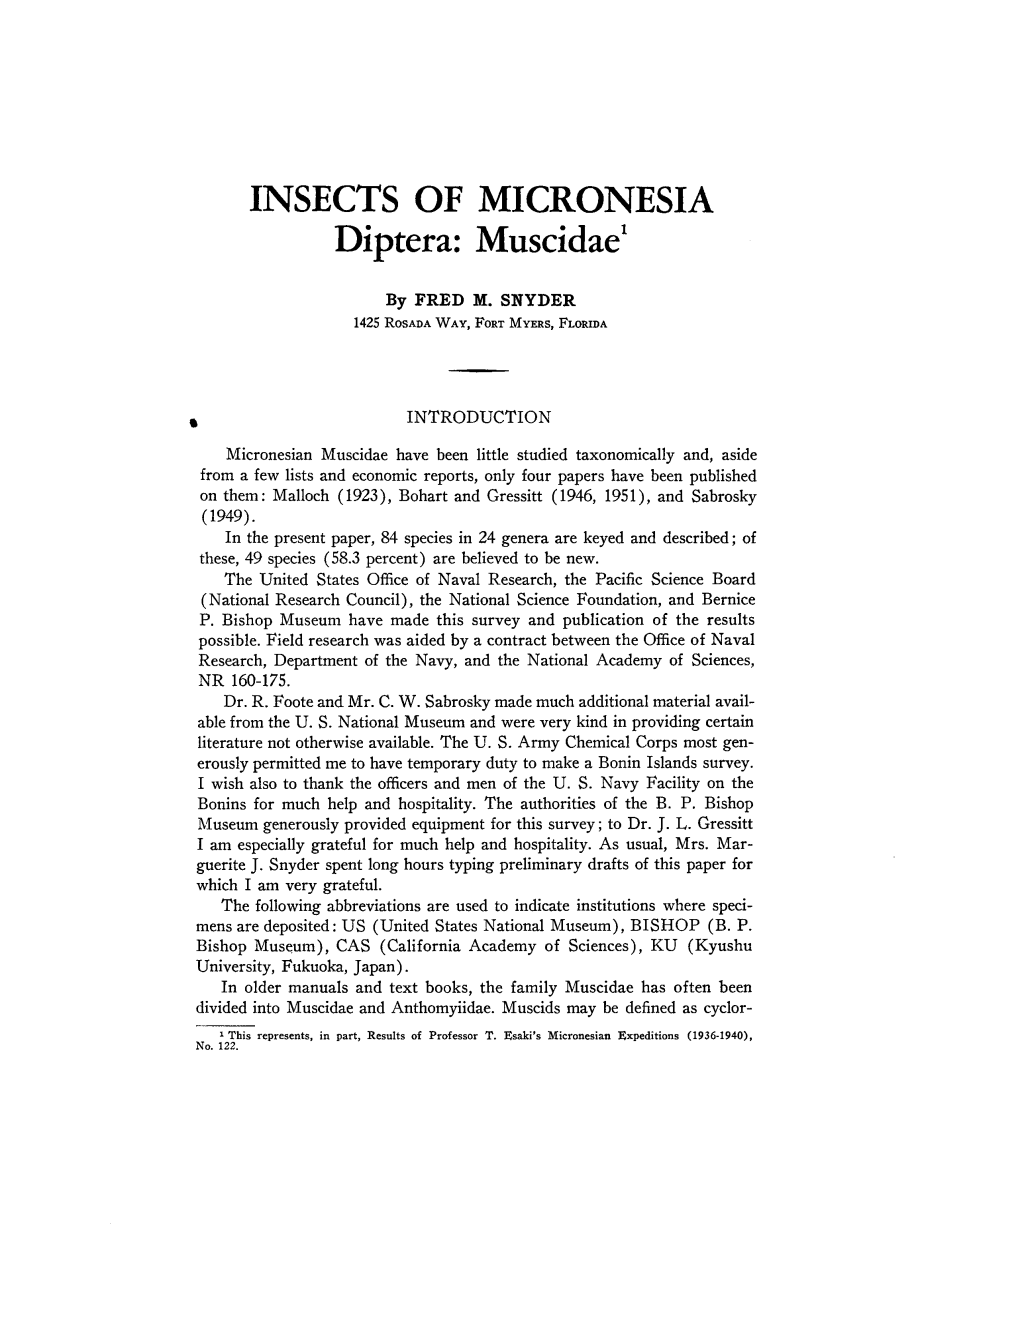 INSECTS of MICRONESIA Diptera: Muscidael